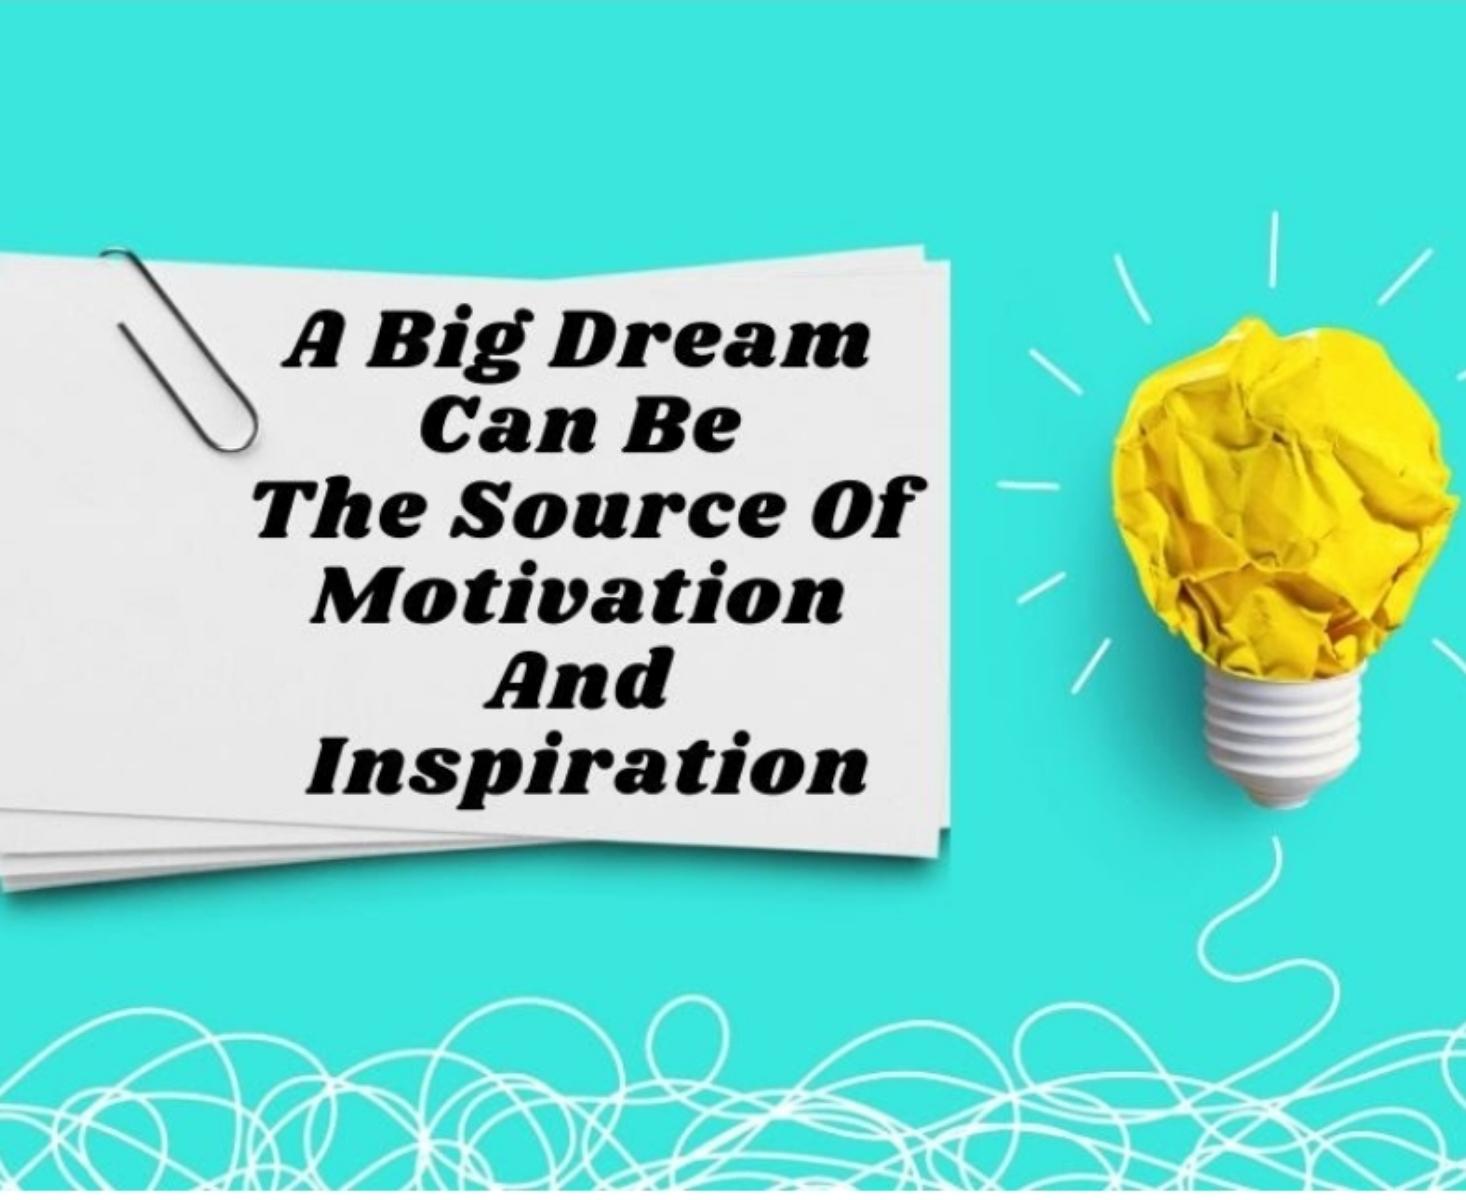 2- It can be the source of motivation and inspiration